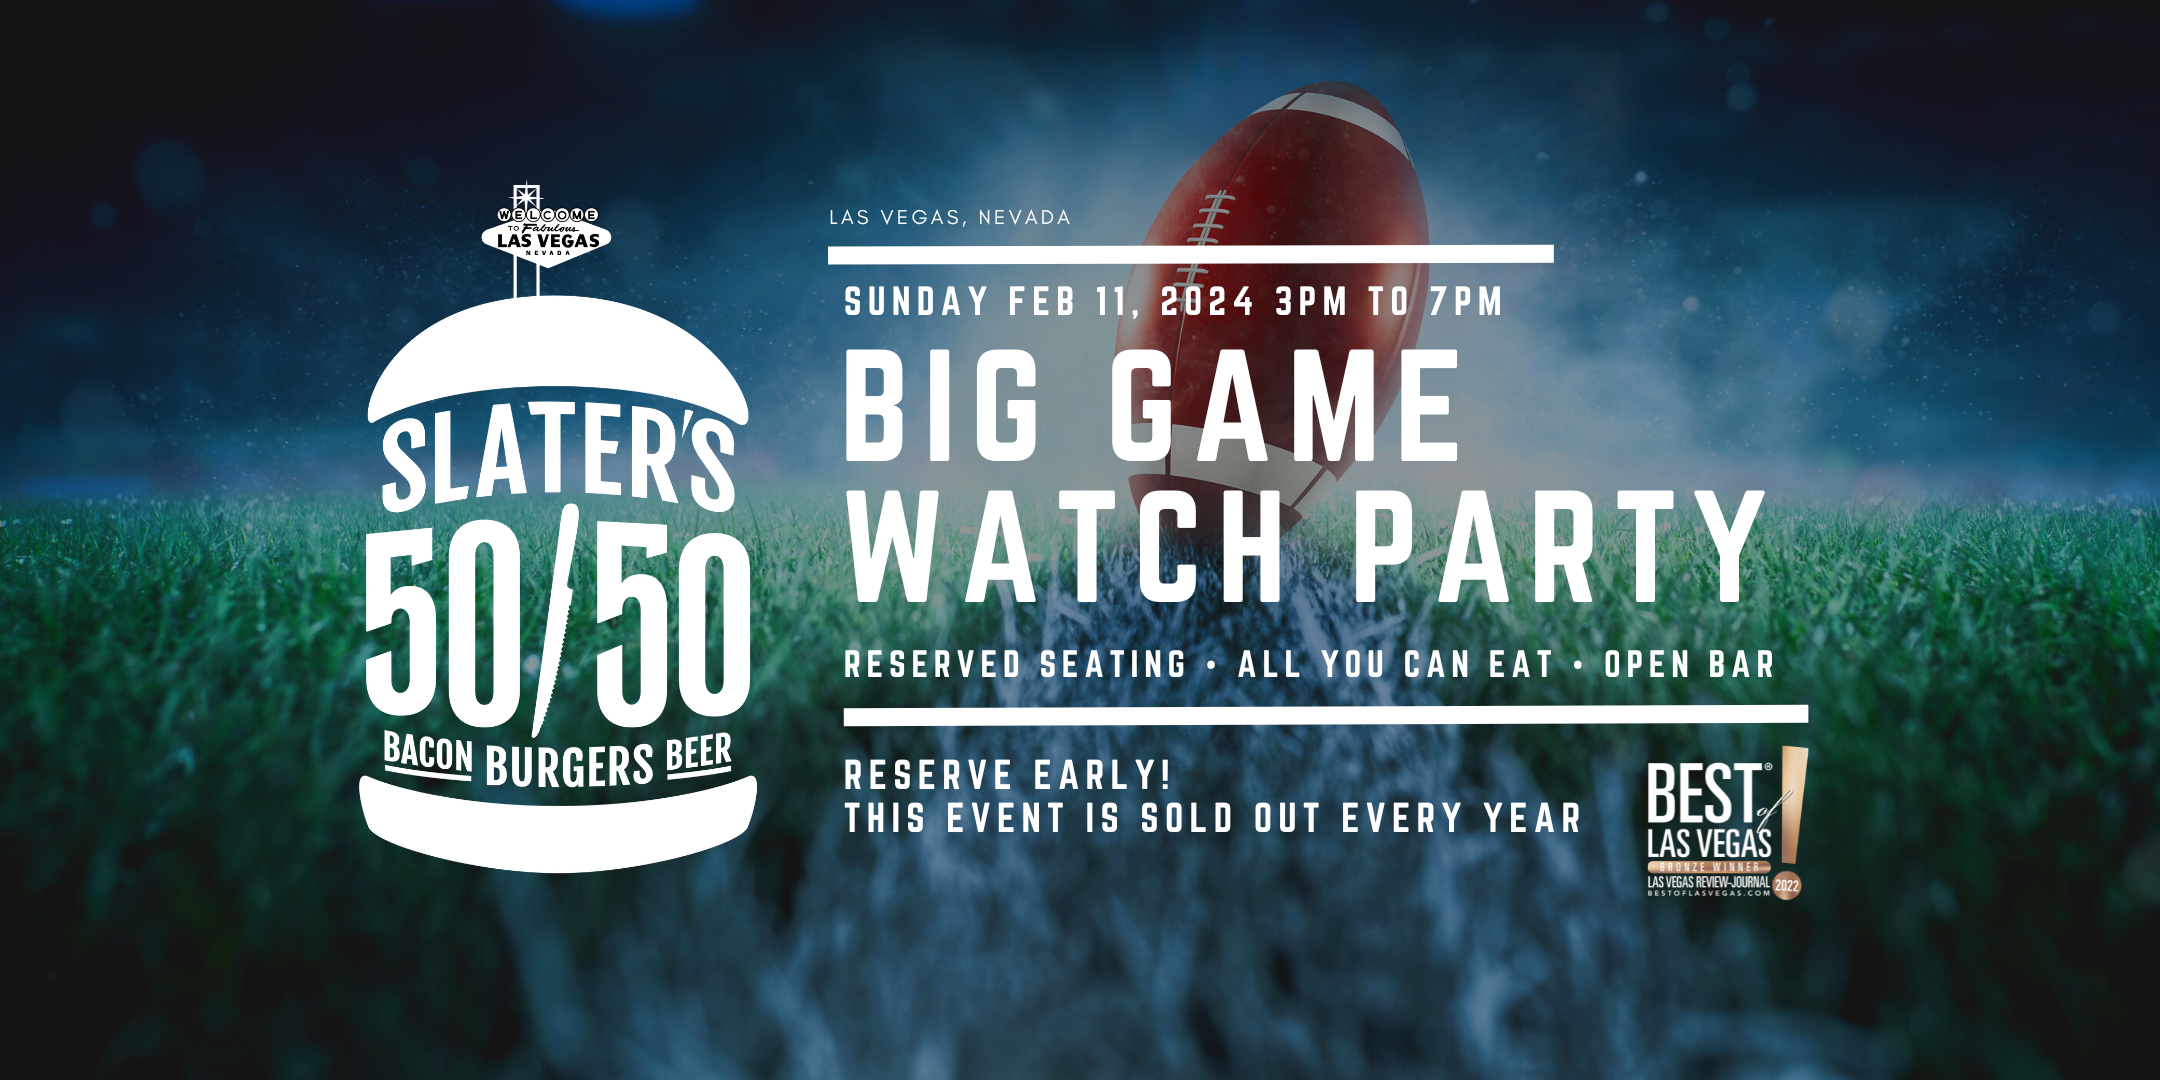 The Big Game Watch Party at Slater’s 50/50 – Silverado Ranch Location